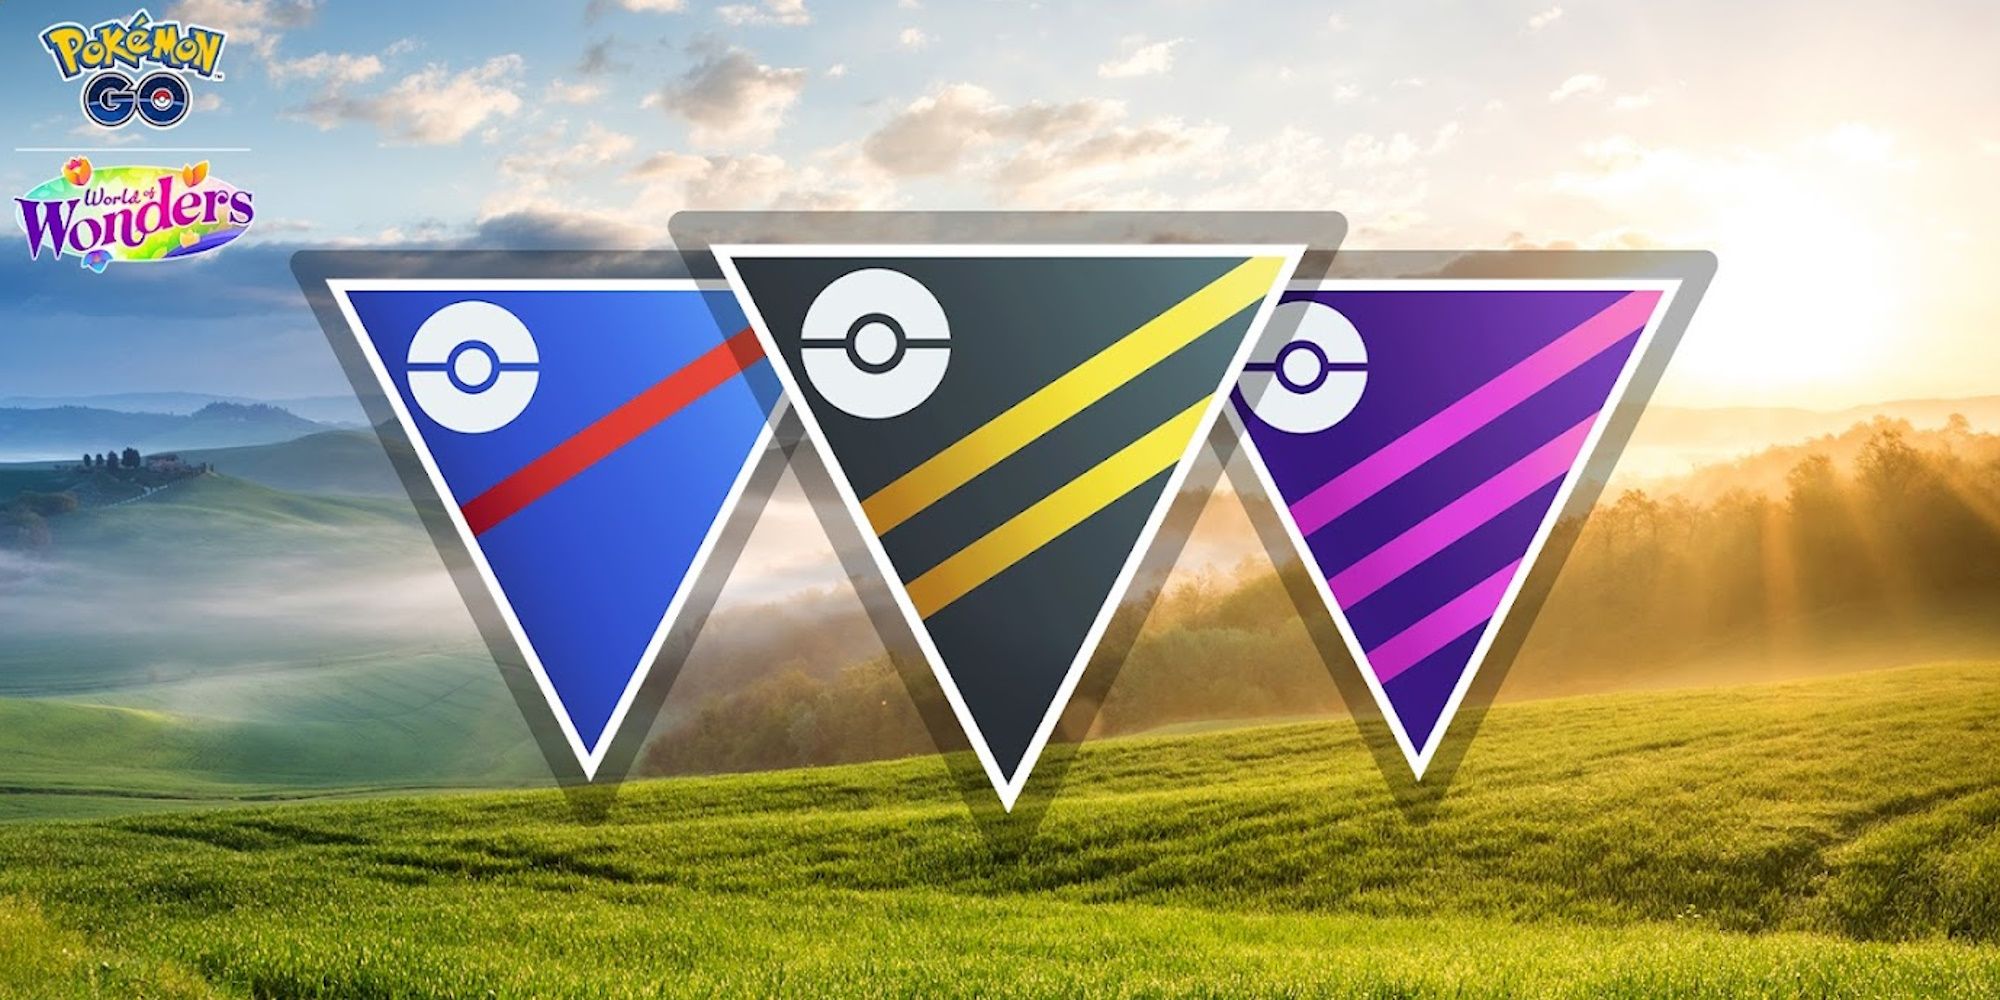 Image of the Great League, Ultra League, and Master League logos from Pokemon Go